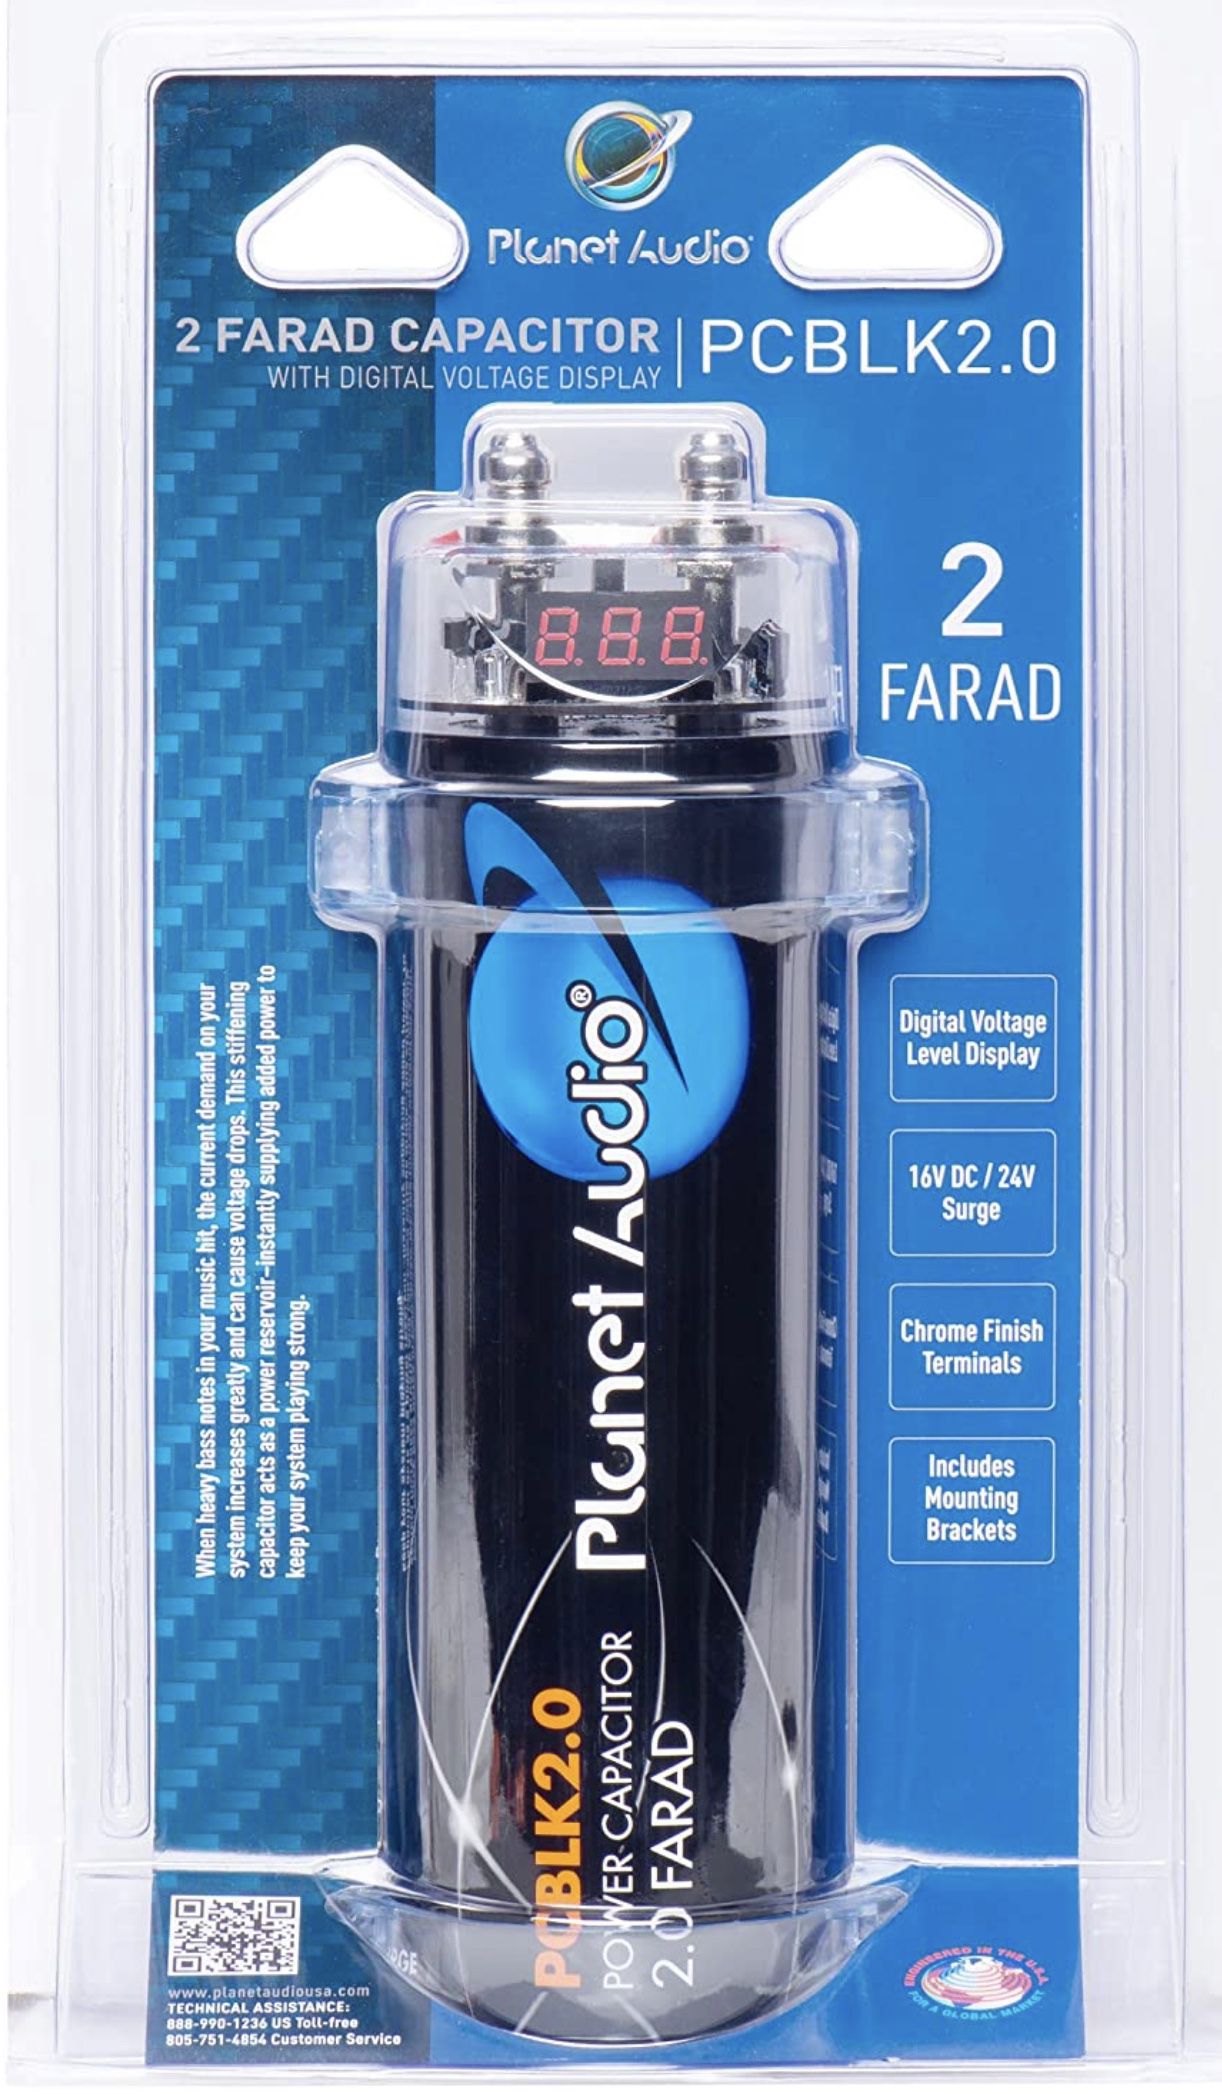 Car Audio Planet Audio PCBLK2.0 – 2 Farad Car Capacitor For Energy Storage To Enhance Bass Demand From Audio System 